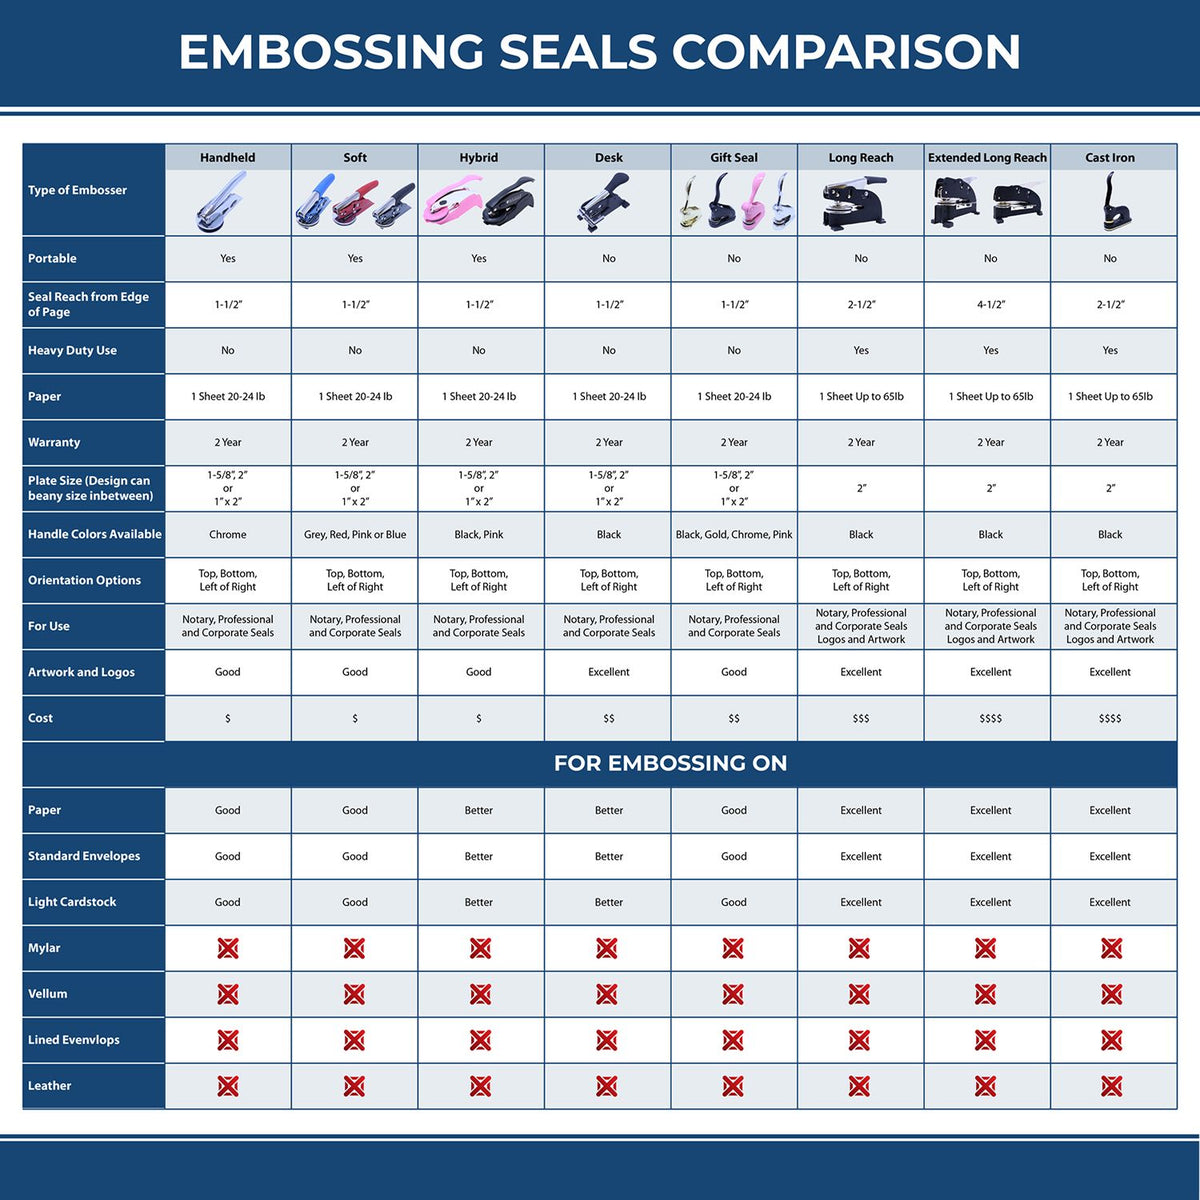 A comparison chart for the different types of mount models available for the Soft Pocket Idaho Landscape Architect Embosser.